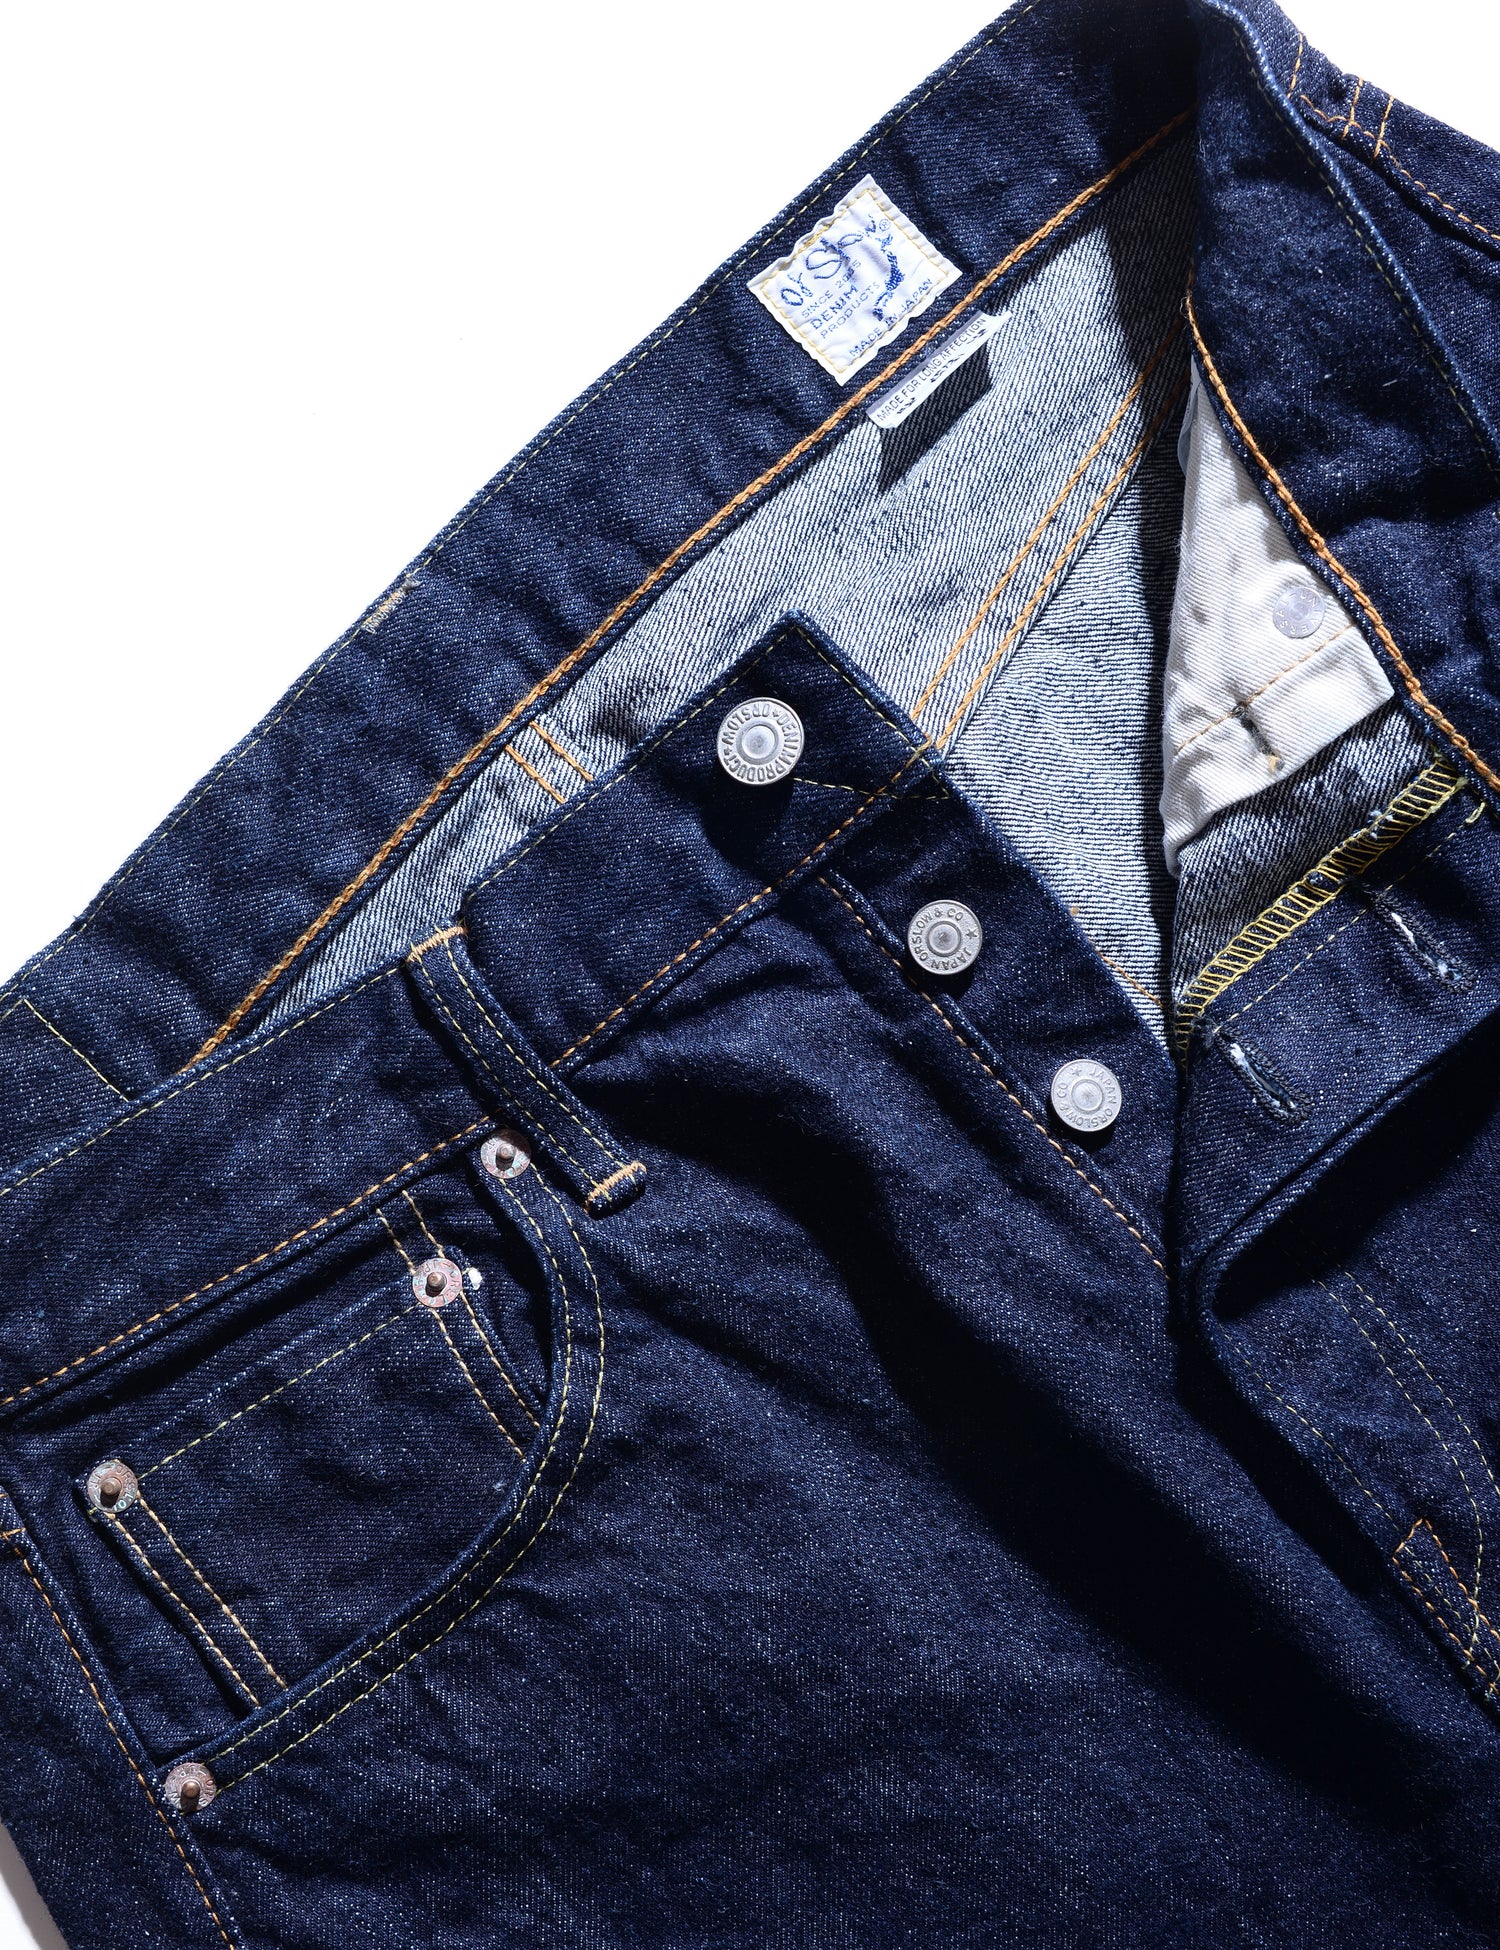 Open button fly detail of 105 Standard Fit Selvedge Denim Jeans